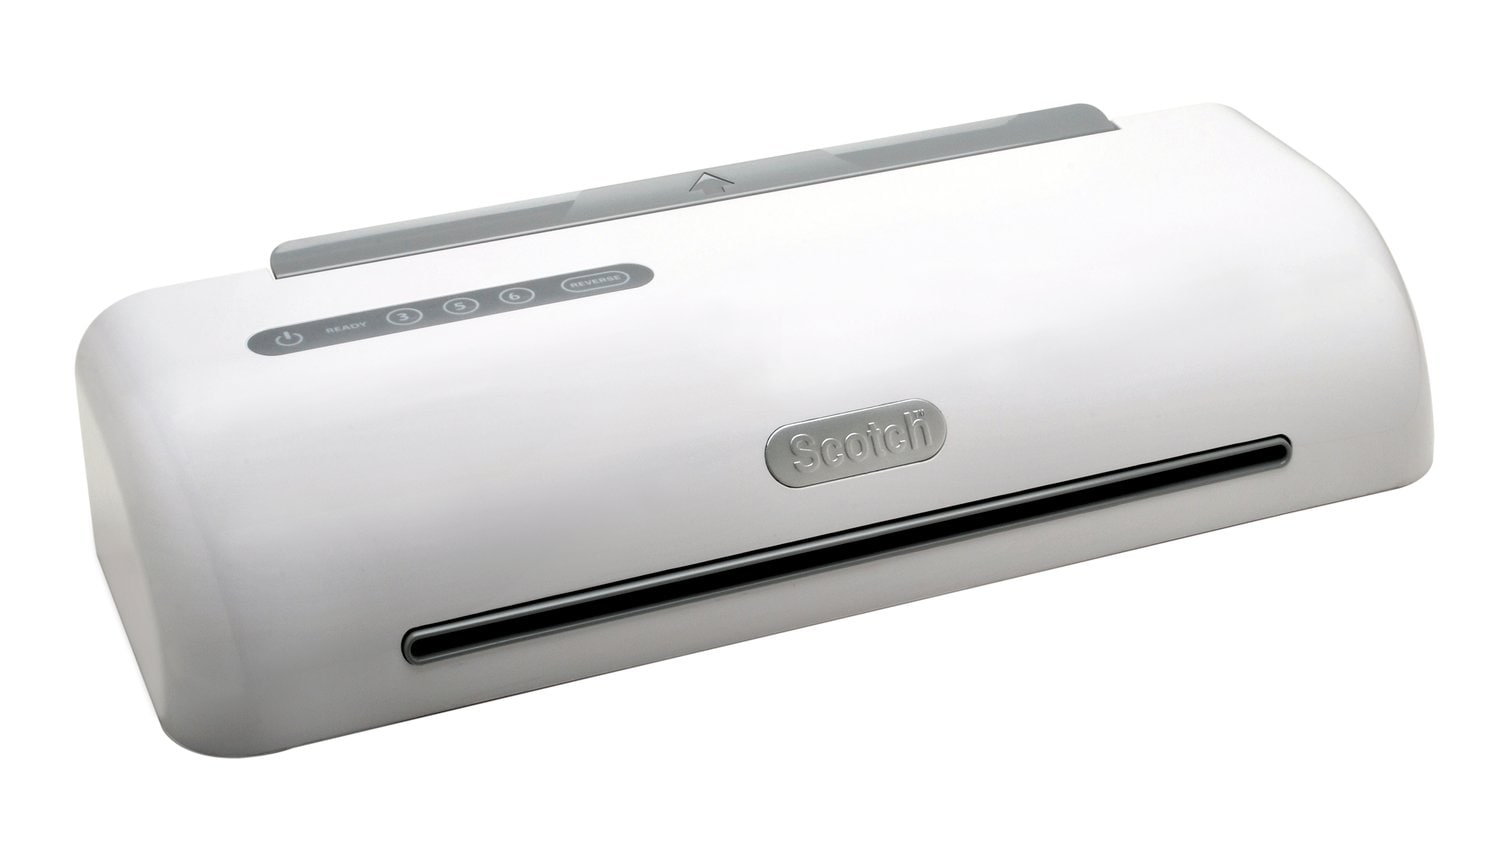 7100217204 - Scotch Thermal Laminator TL1306, with 2 Laminating Pouches 8.9 IN x 11.4 IN (228 mm x 291 mm)